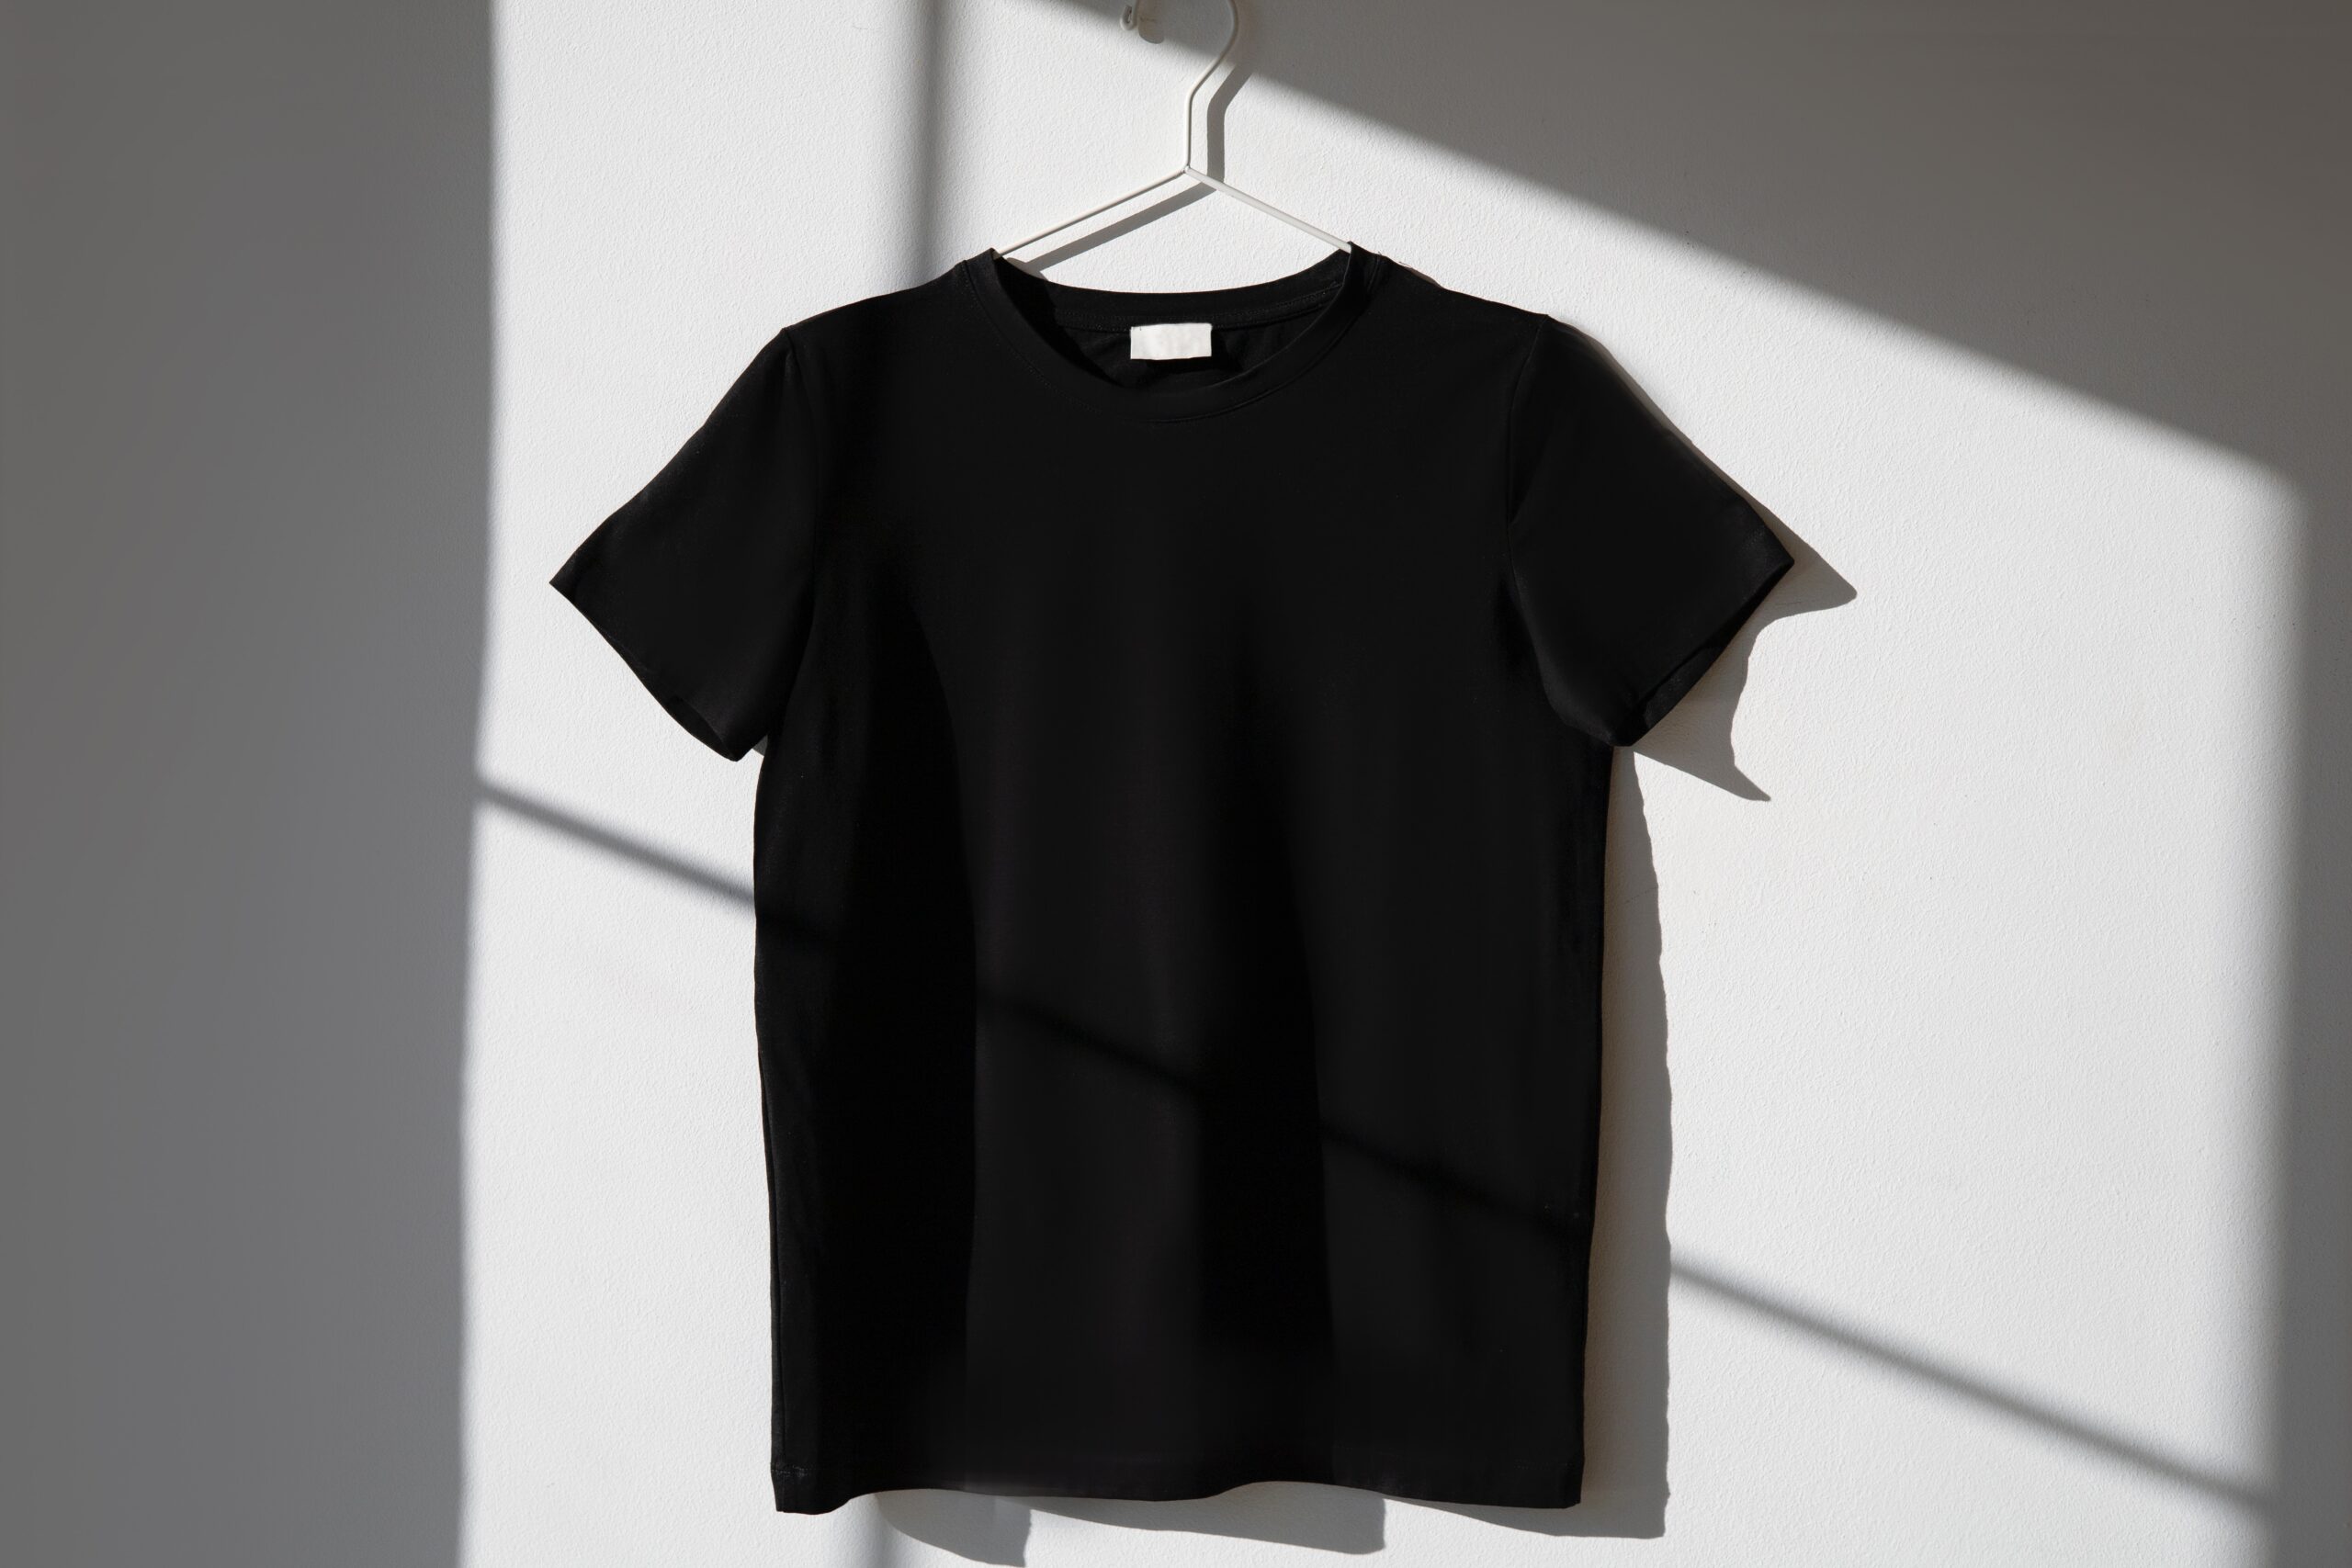 black blank t-shirt hanging on the wall